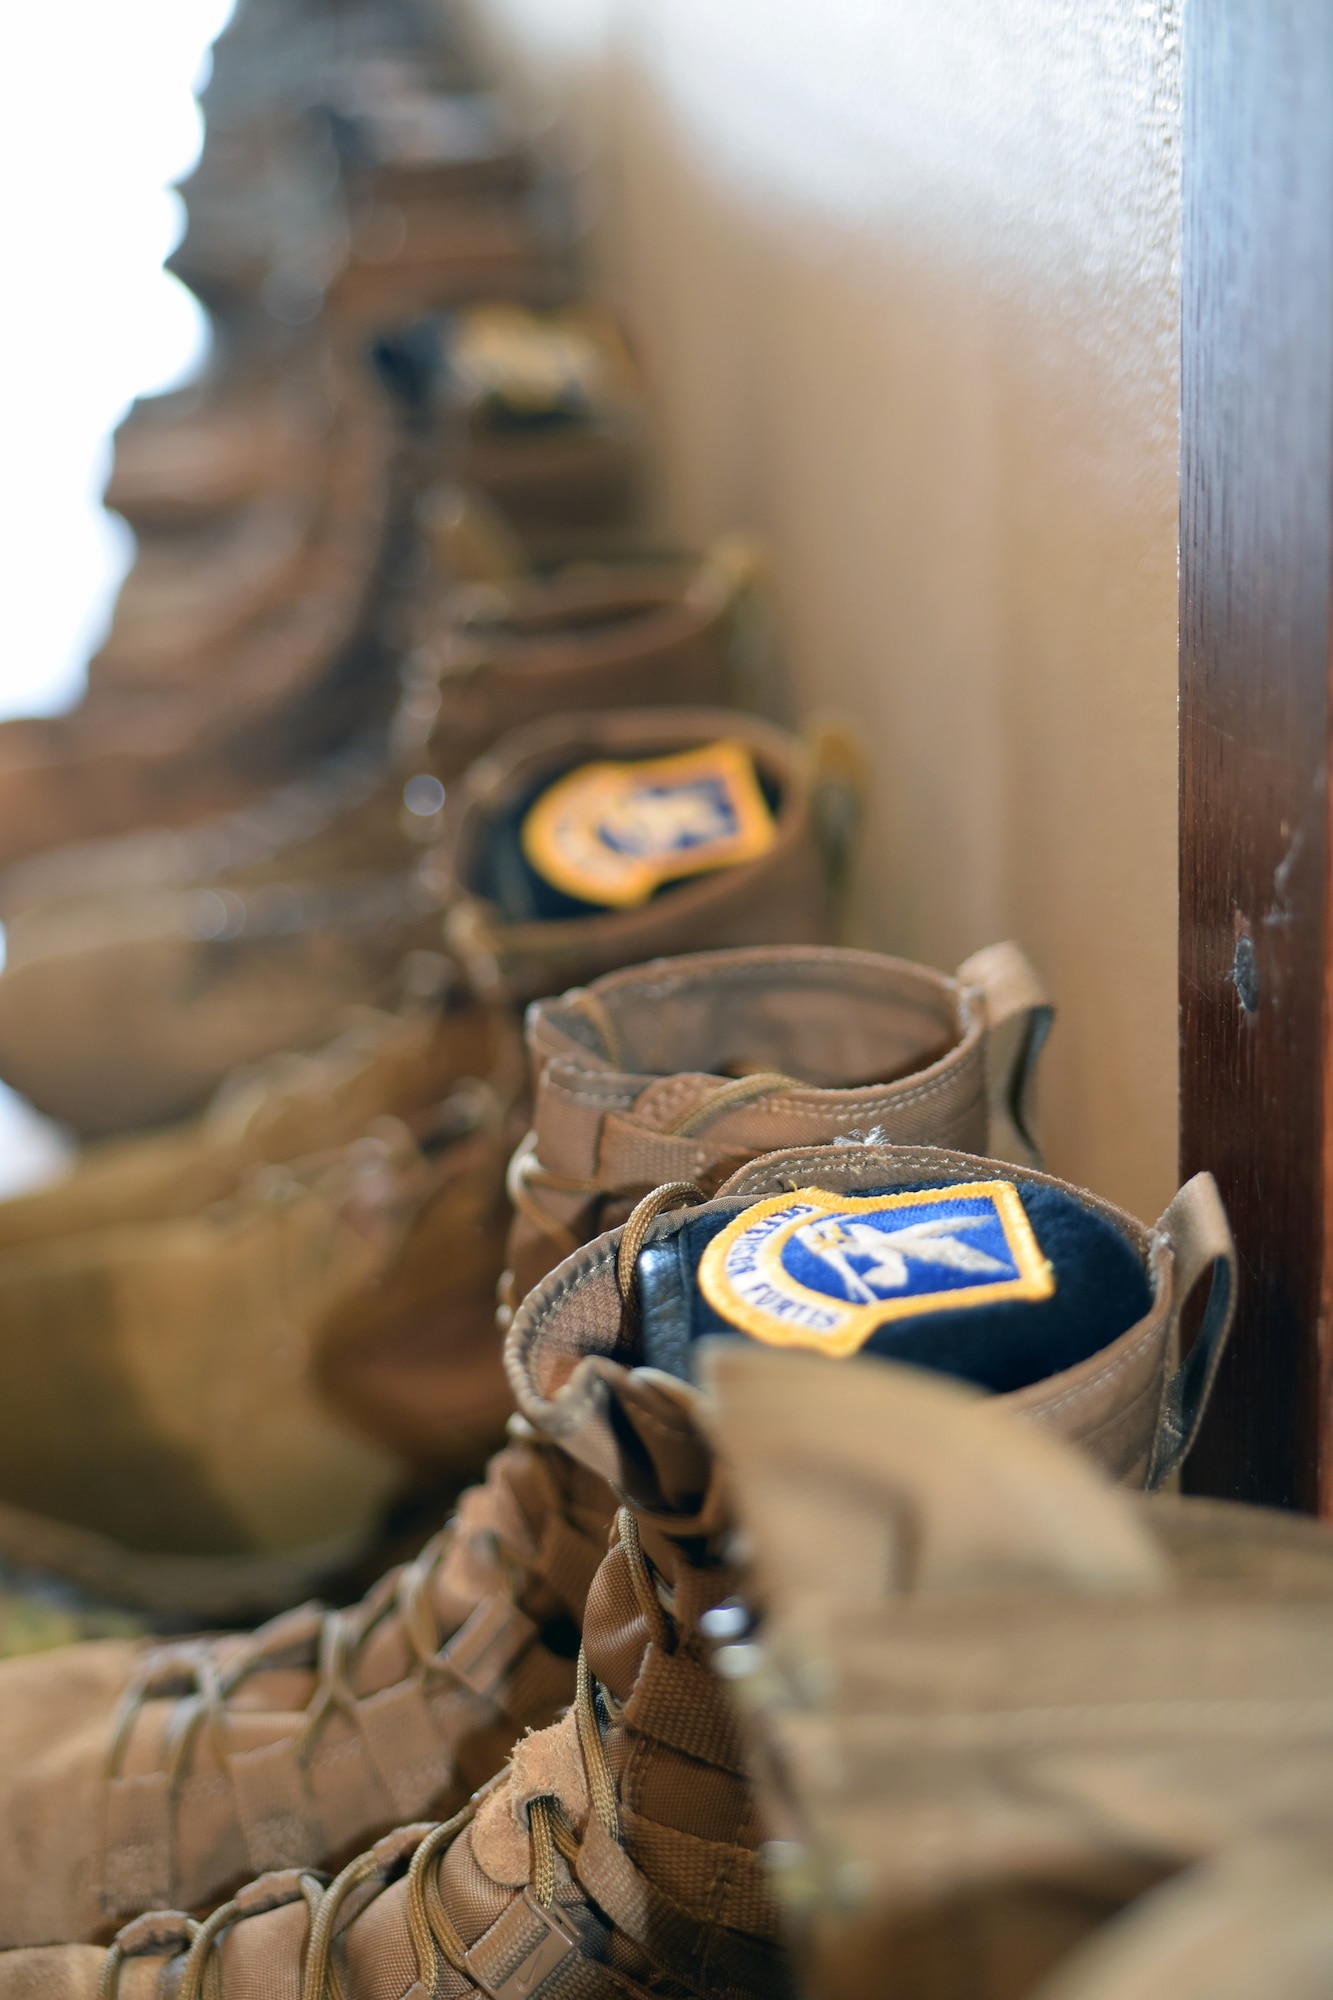 Phoenix Raven Qualification Course students’ boots line the hallway leading to the U.S. Air Force Expeditionary Center’s Redman Room, Aug. 12, 2020, at Joint Base McGuire-Dix-Lakehurst, New Jersey.  The course, which ran from July 27 to Aug, 19, qualifies selected security forces personnel to perform as members of a force protection team assigned to deploy with Department of Defense aircraft to austere environments. Students are trained to perform as teams to detect, deter, and counter threats to personnel/aircraft at deployed locations by performing close-in aircraft security and advising aircrew on force protection measures. In addition, the course prepares students to conduct/report airfield assessments and perform flight deck denial duties on select missions. (U.S. Air Force photo by Maj. George Tobias)